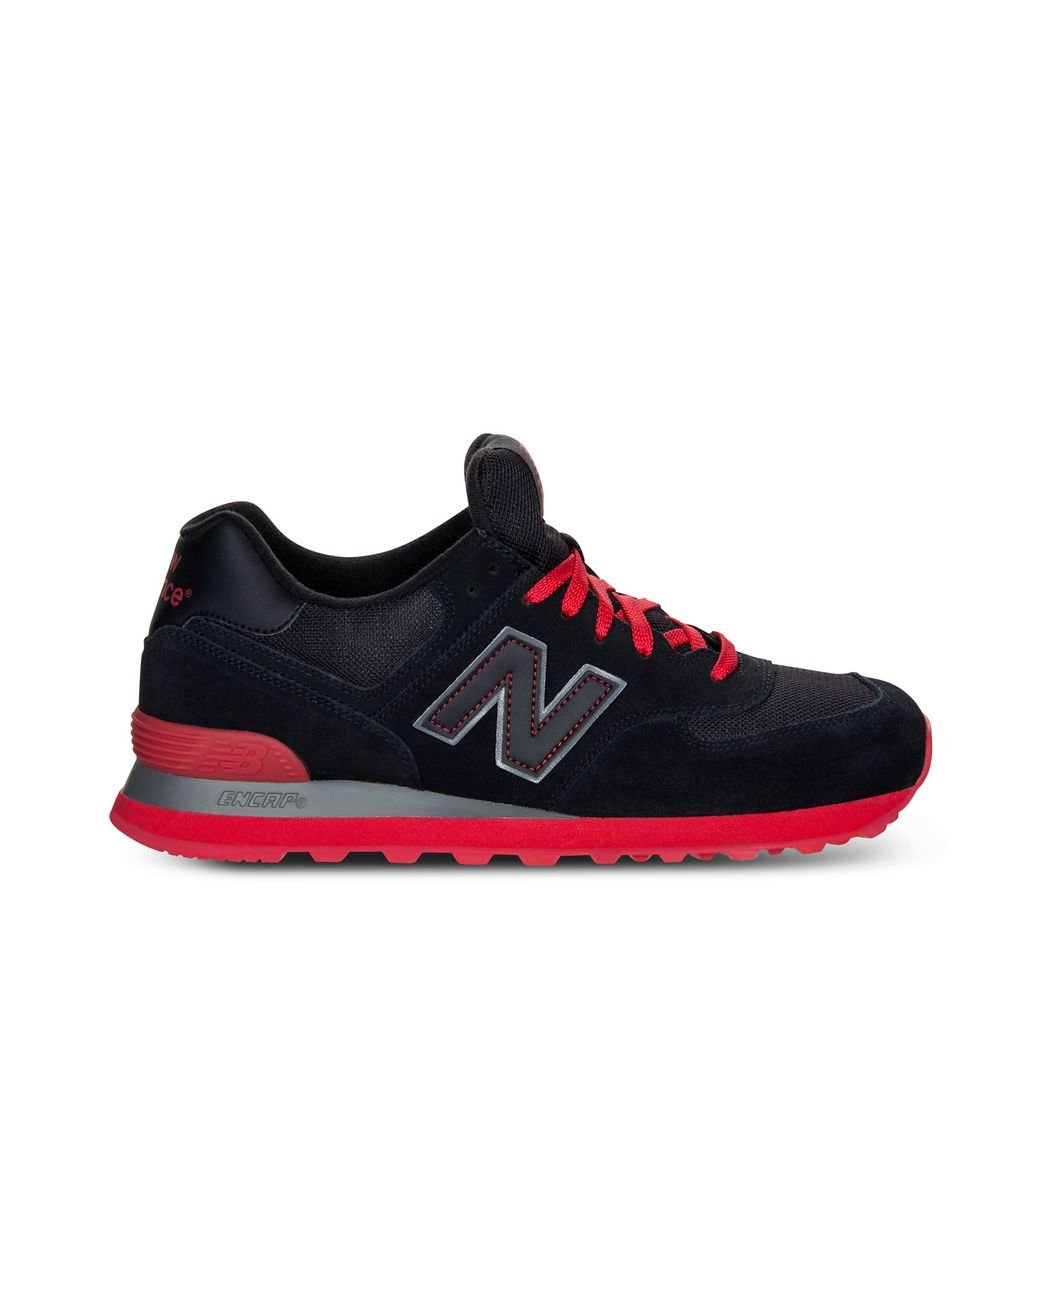 New Balance 574 Sneakers in Black/Red (Red) for Men | Lyst